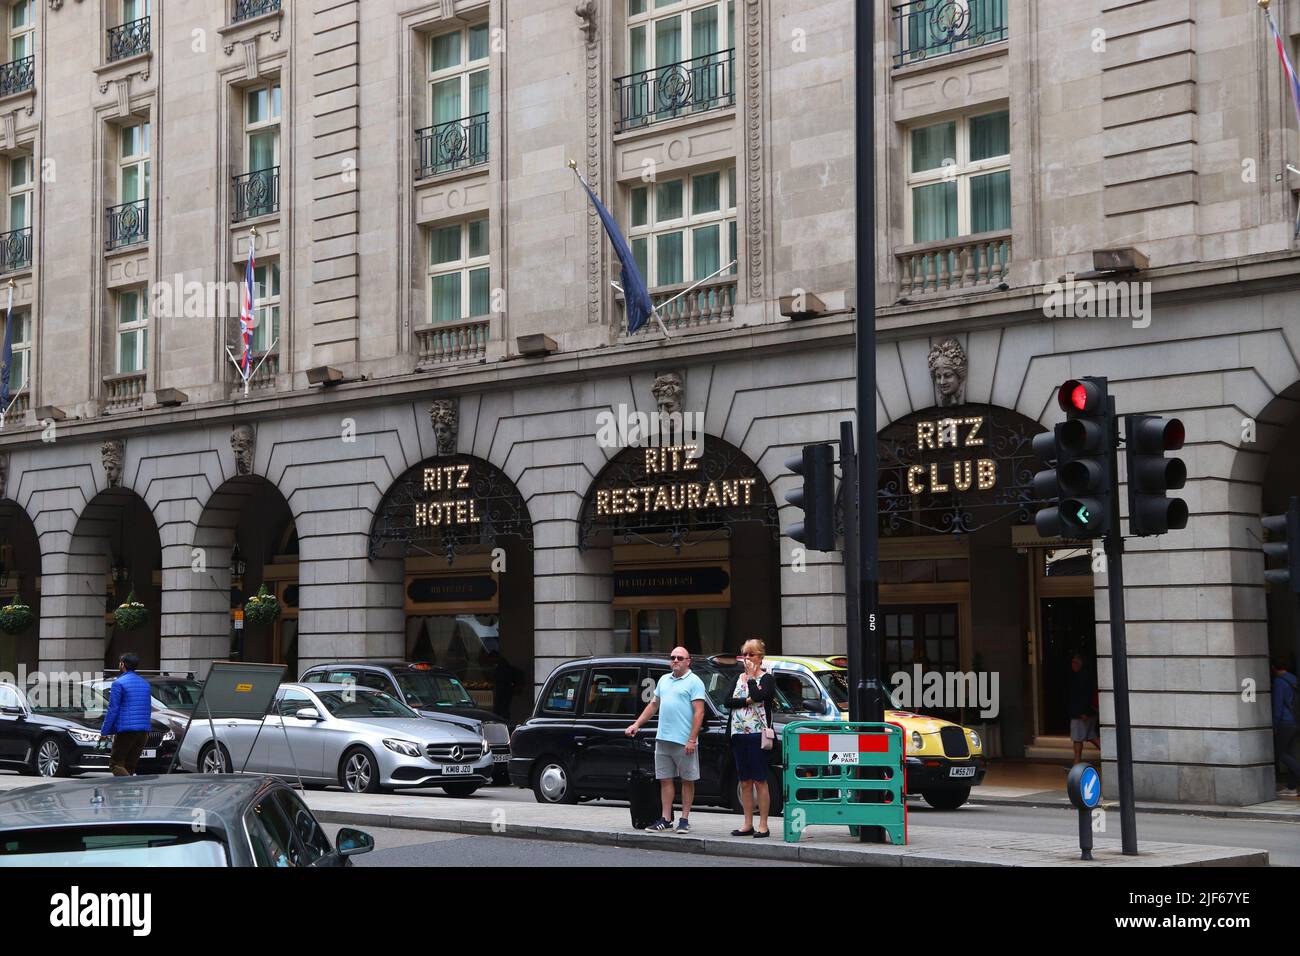 LONDON, UK - JULY 15, 2019: Ritz Hotel five star luxury hotel in Piccadilly, London. There are 45,000 hotels in the UK. Stock Photo